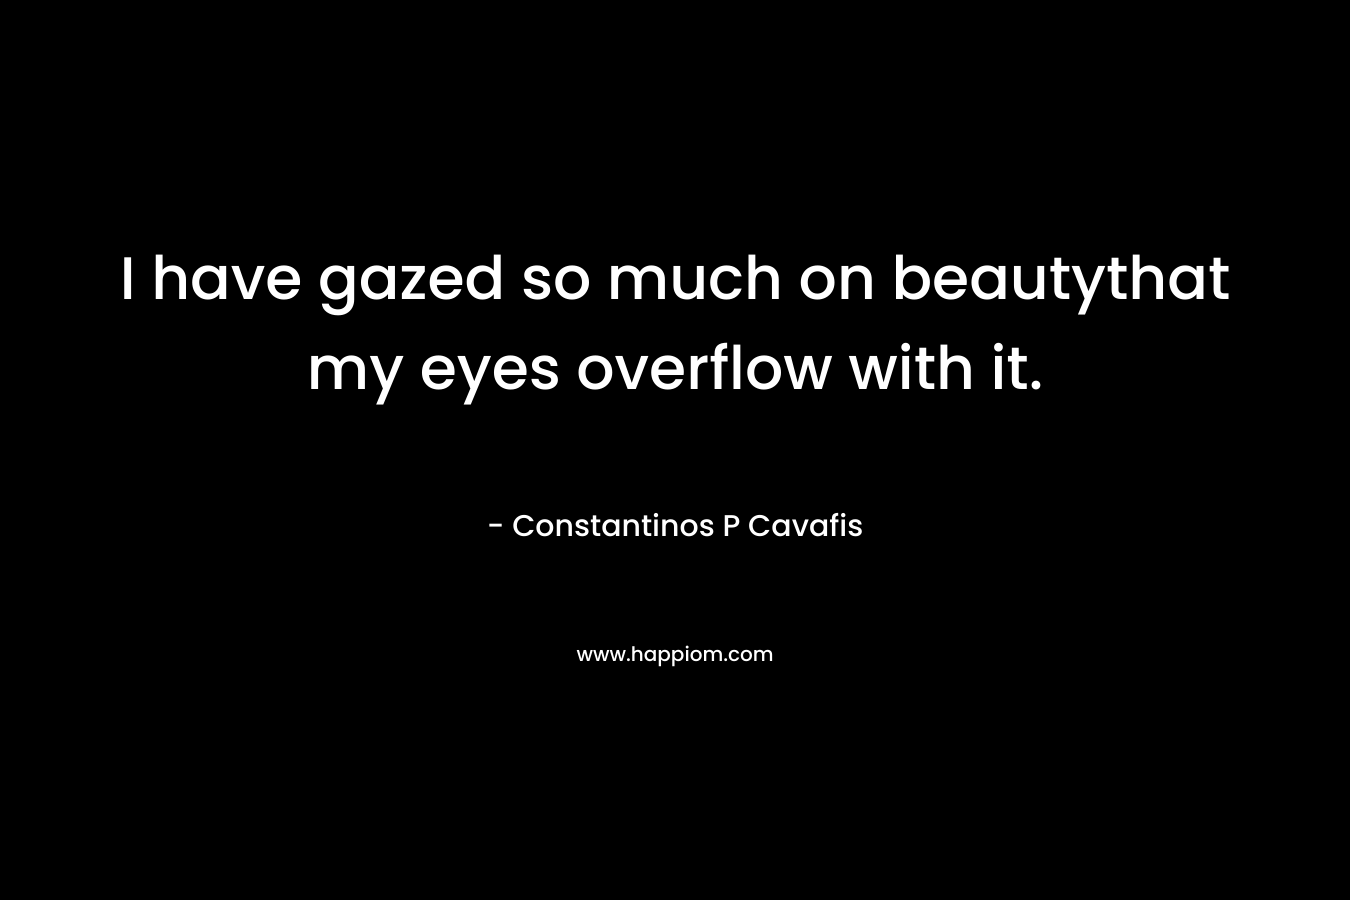 I have gazed so much on beautythat my eyes overflow with it.